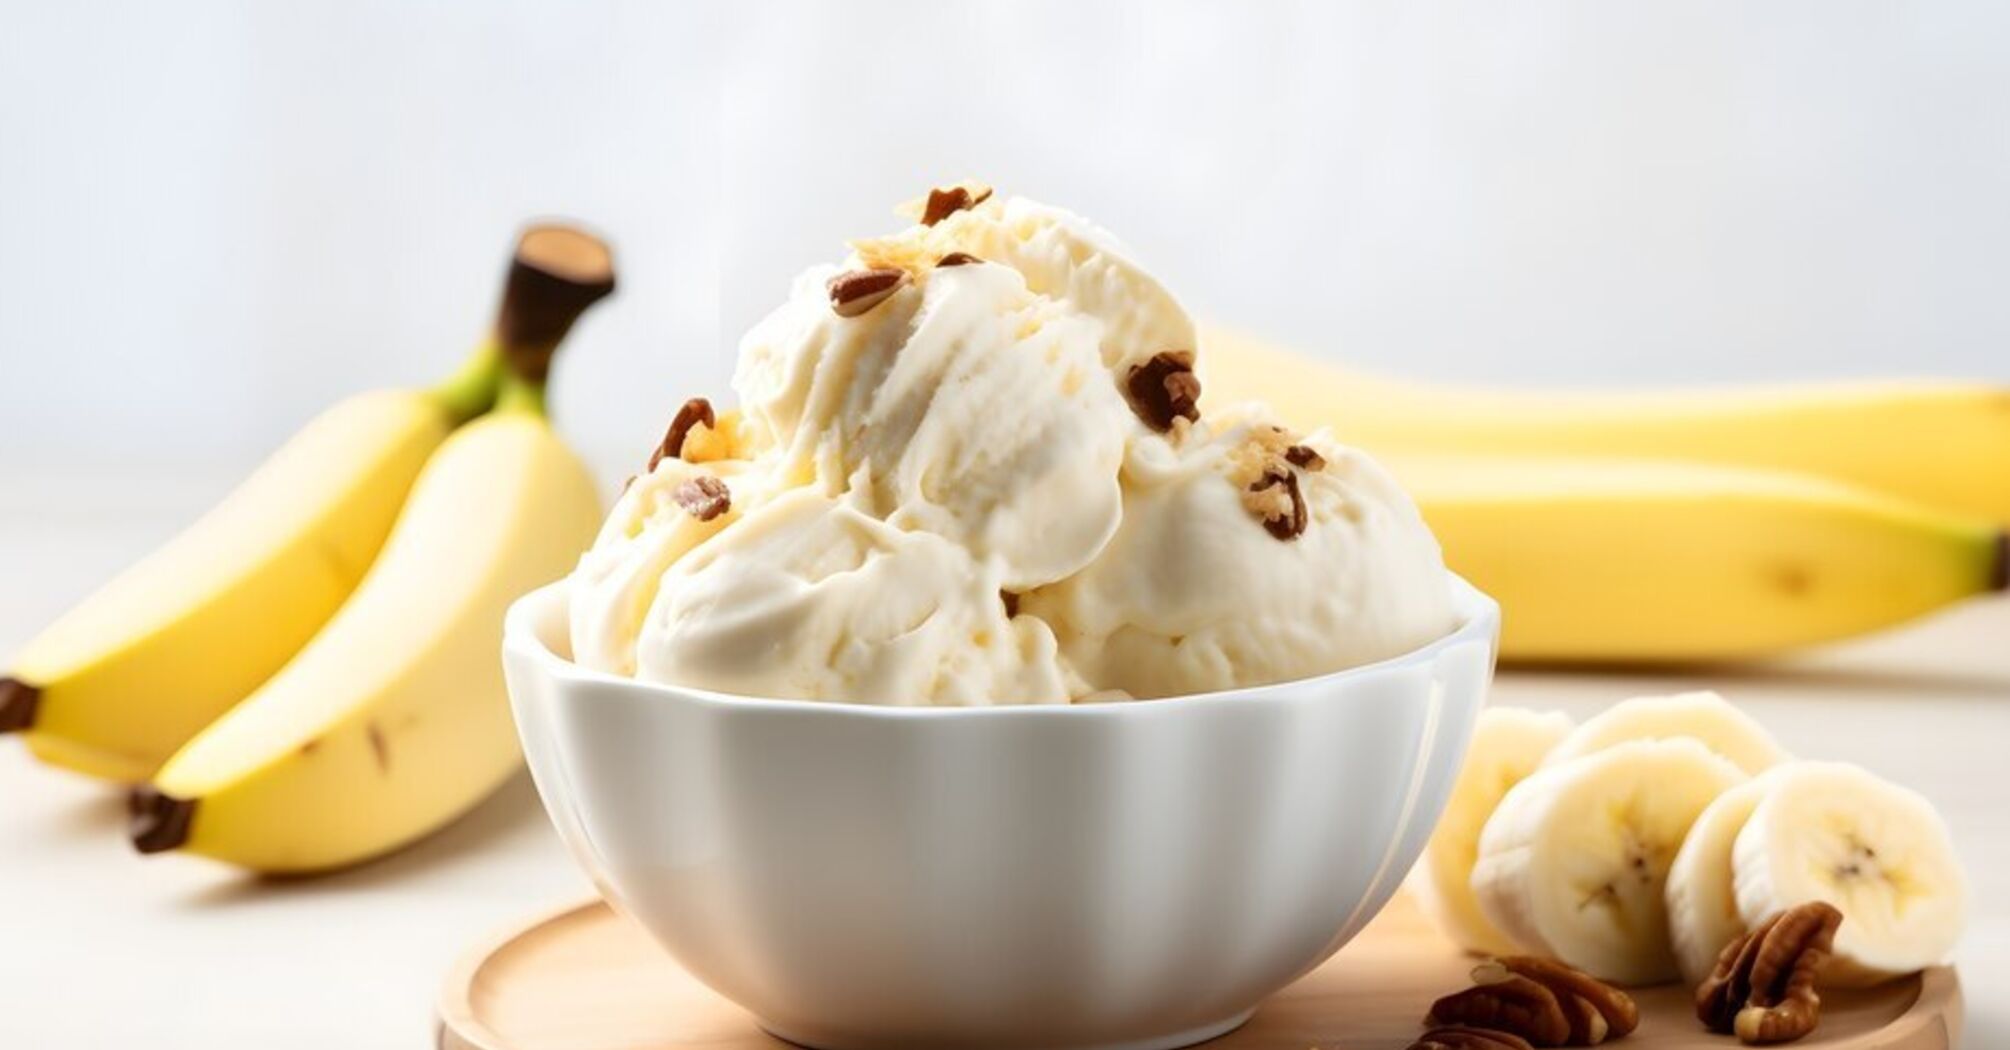 You need only two ingredients: recipe for delicious homemade ice cream